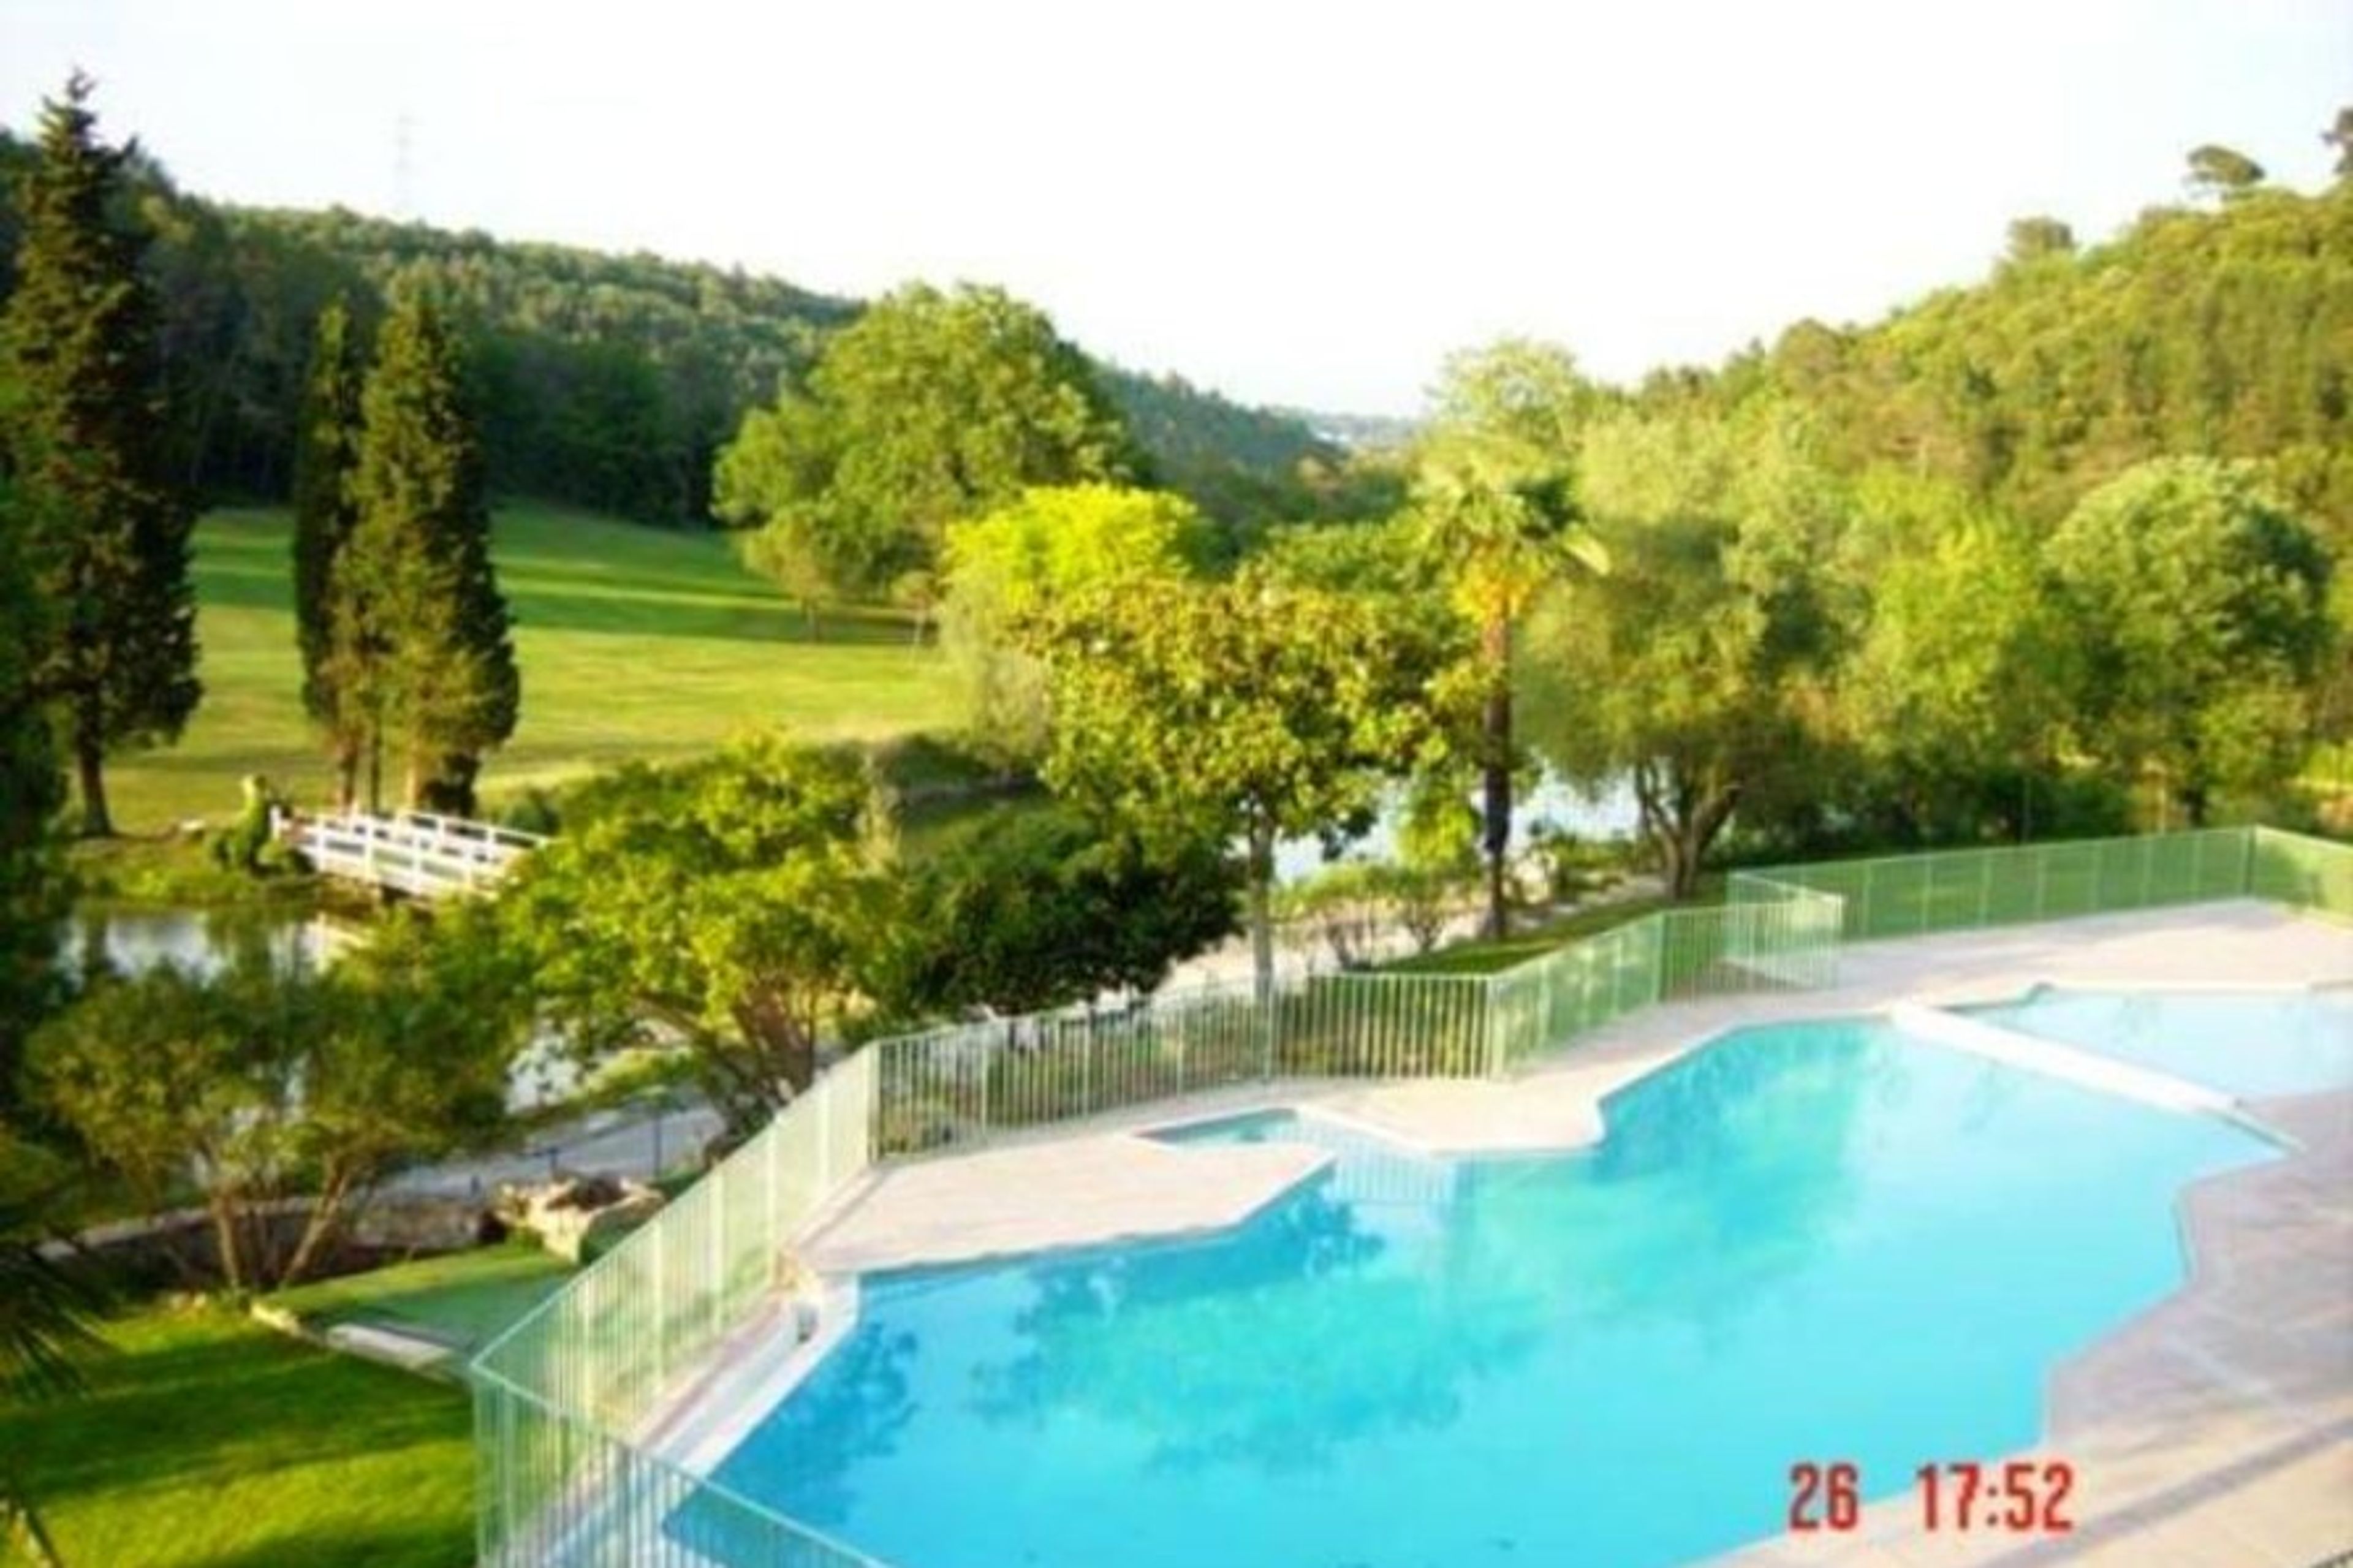 Swimming pool with view of golf course